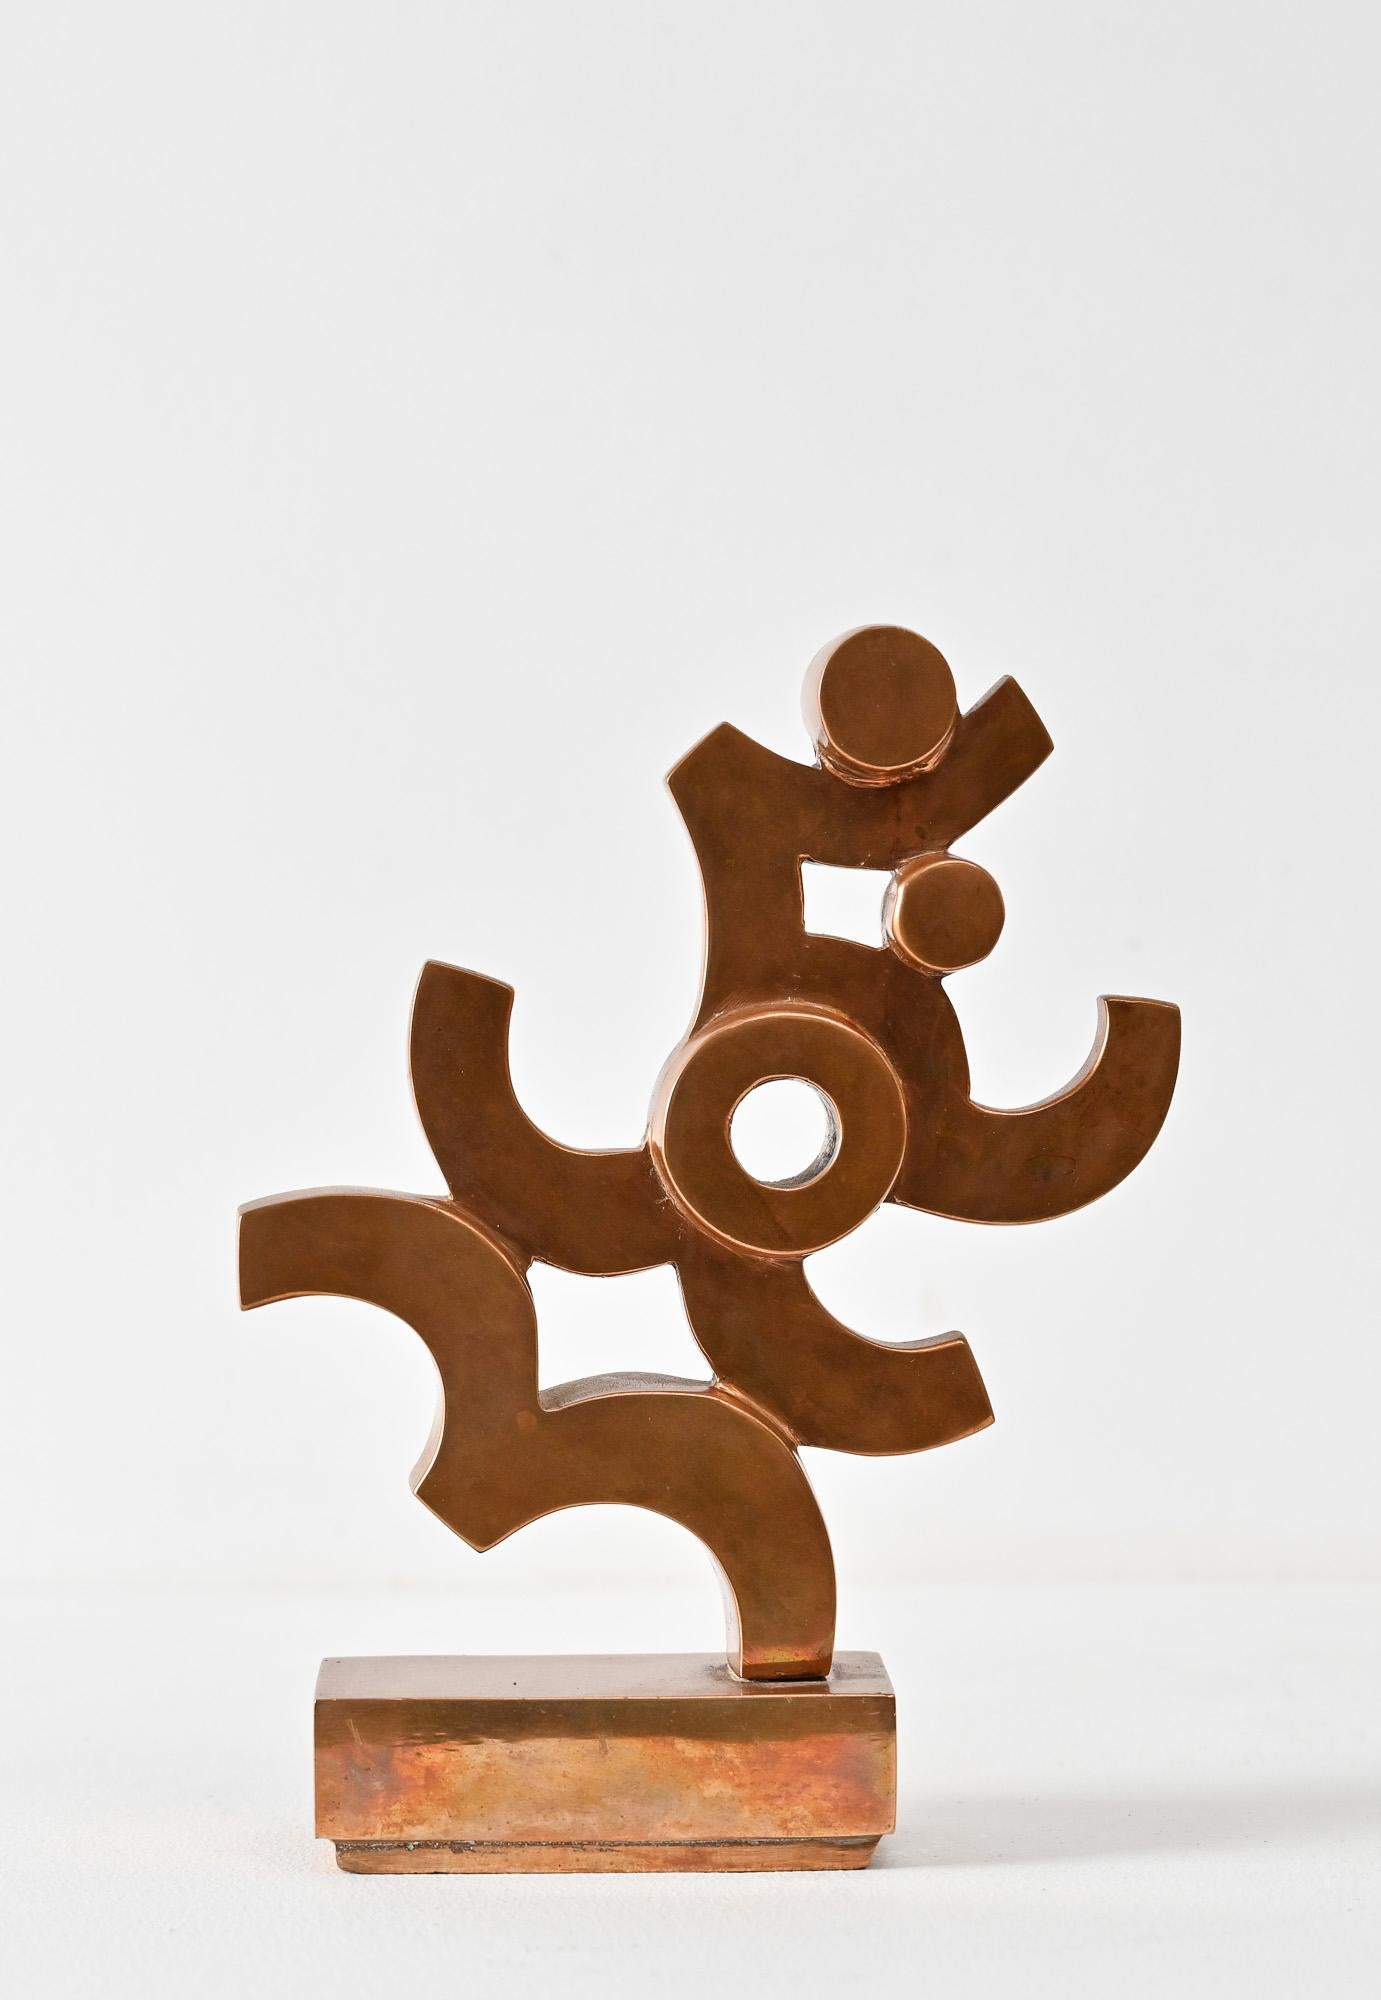 cast bronze abstract form 1 by Umberto Mastroianni 4